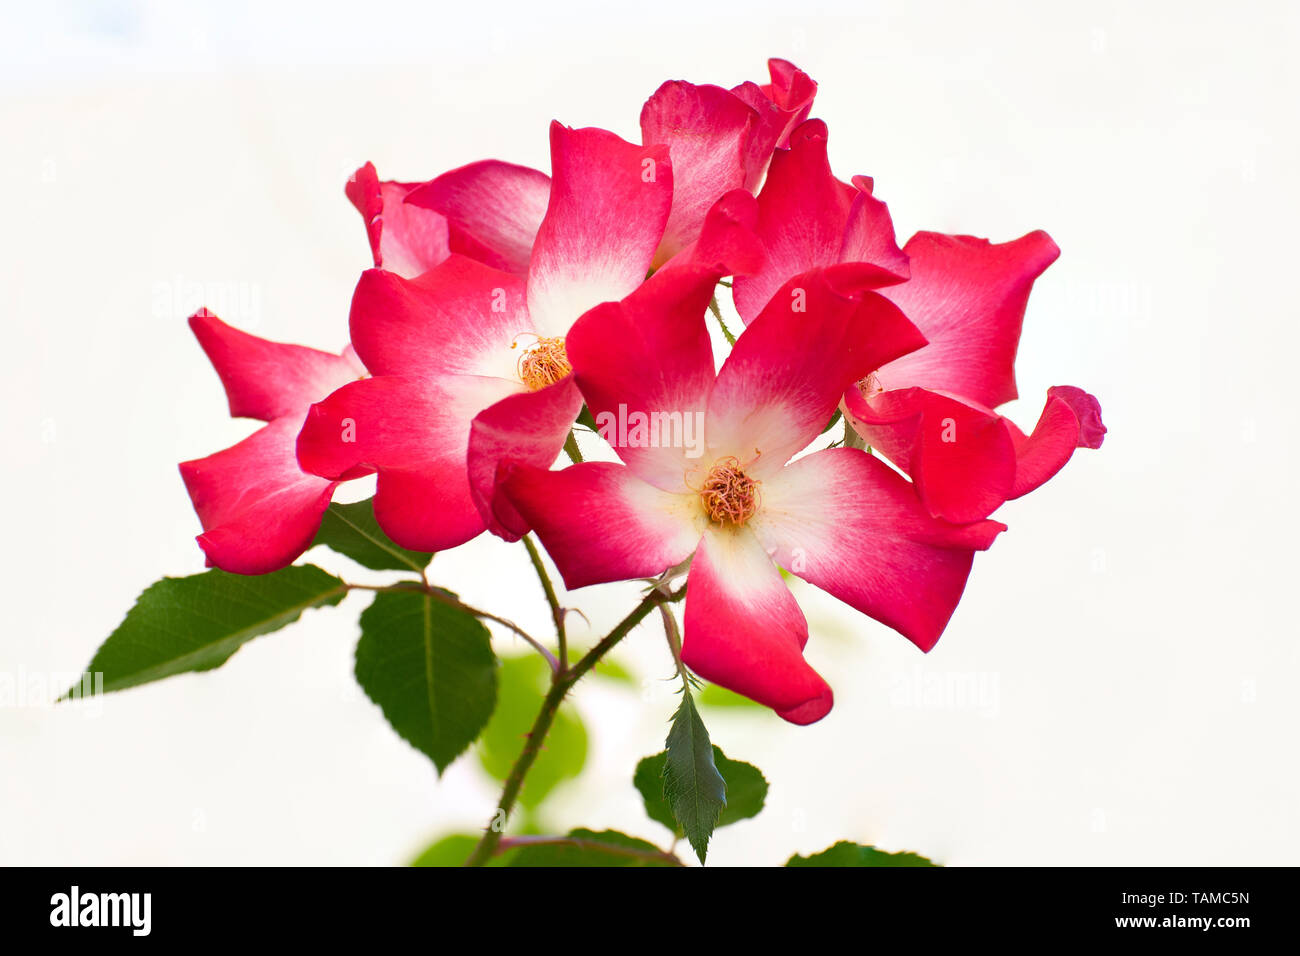 Red rose flower with yellow center cocktail Meimick climber rose Stock Photo